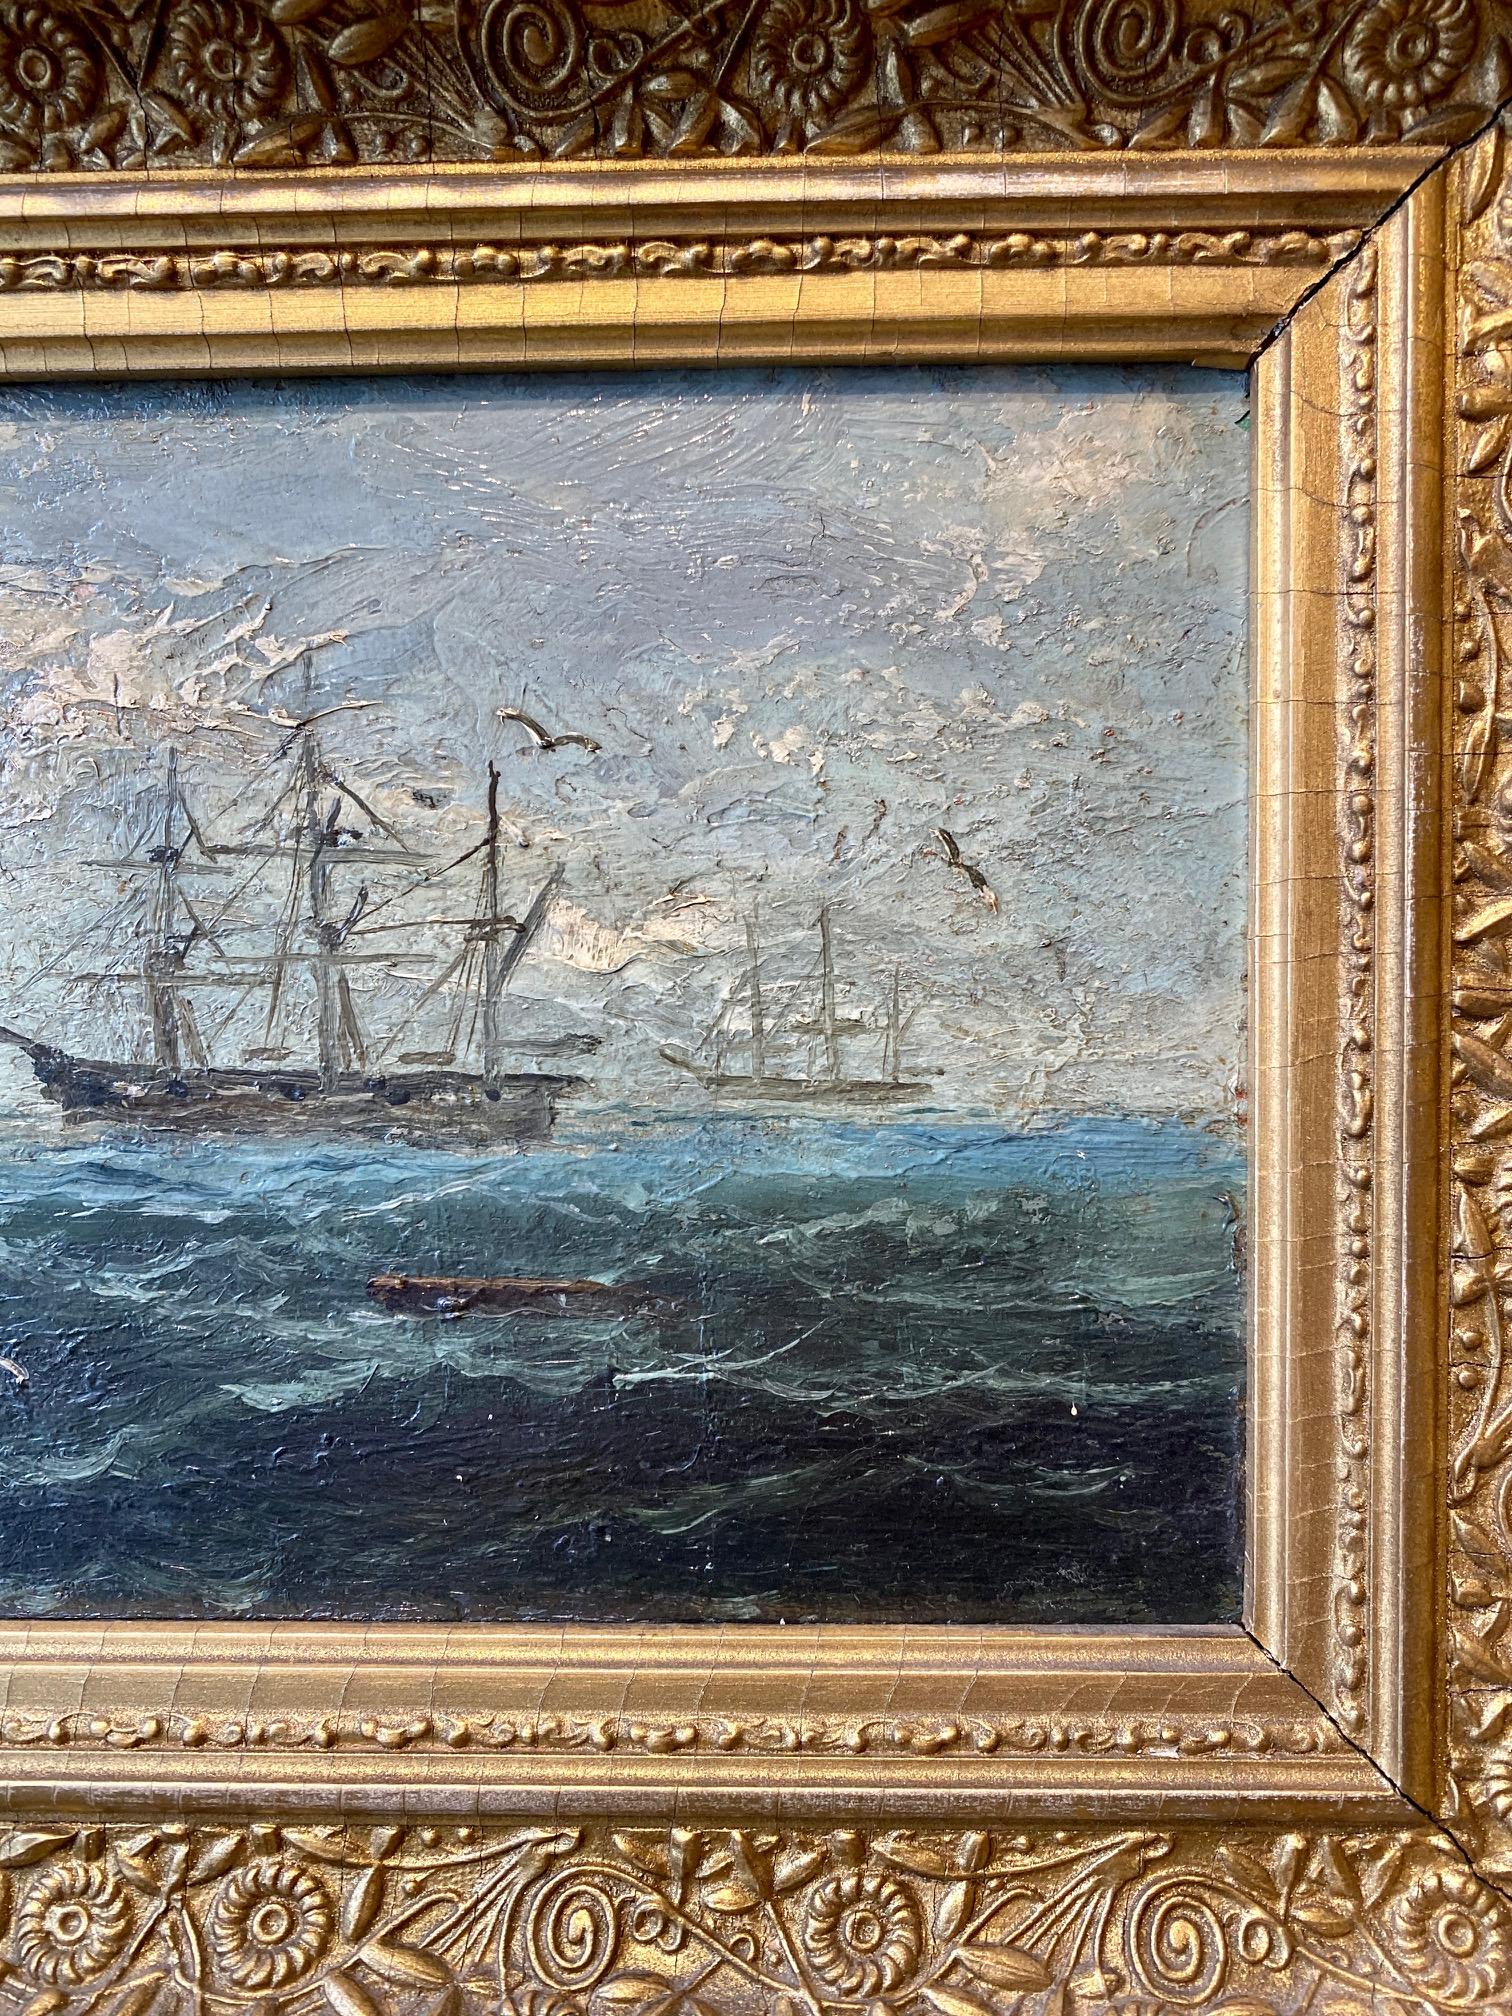 Late Victorian Seascape with Whale Ship, by J.H. Appleby, circa 1880